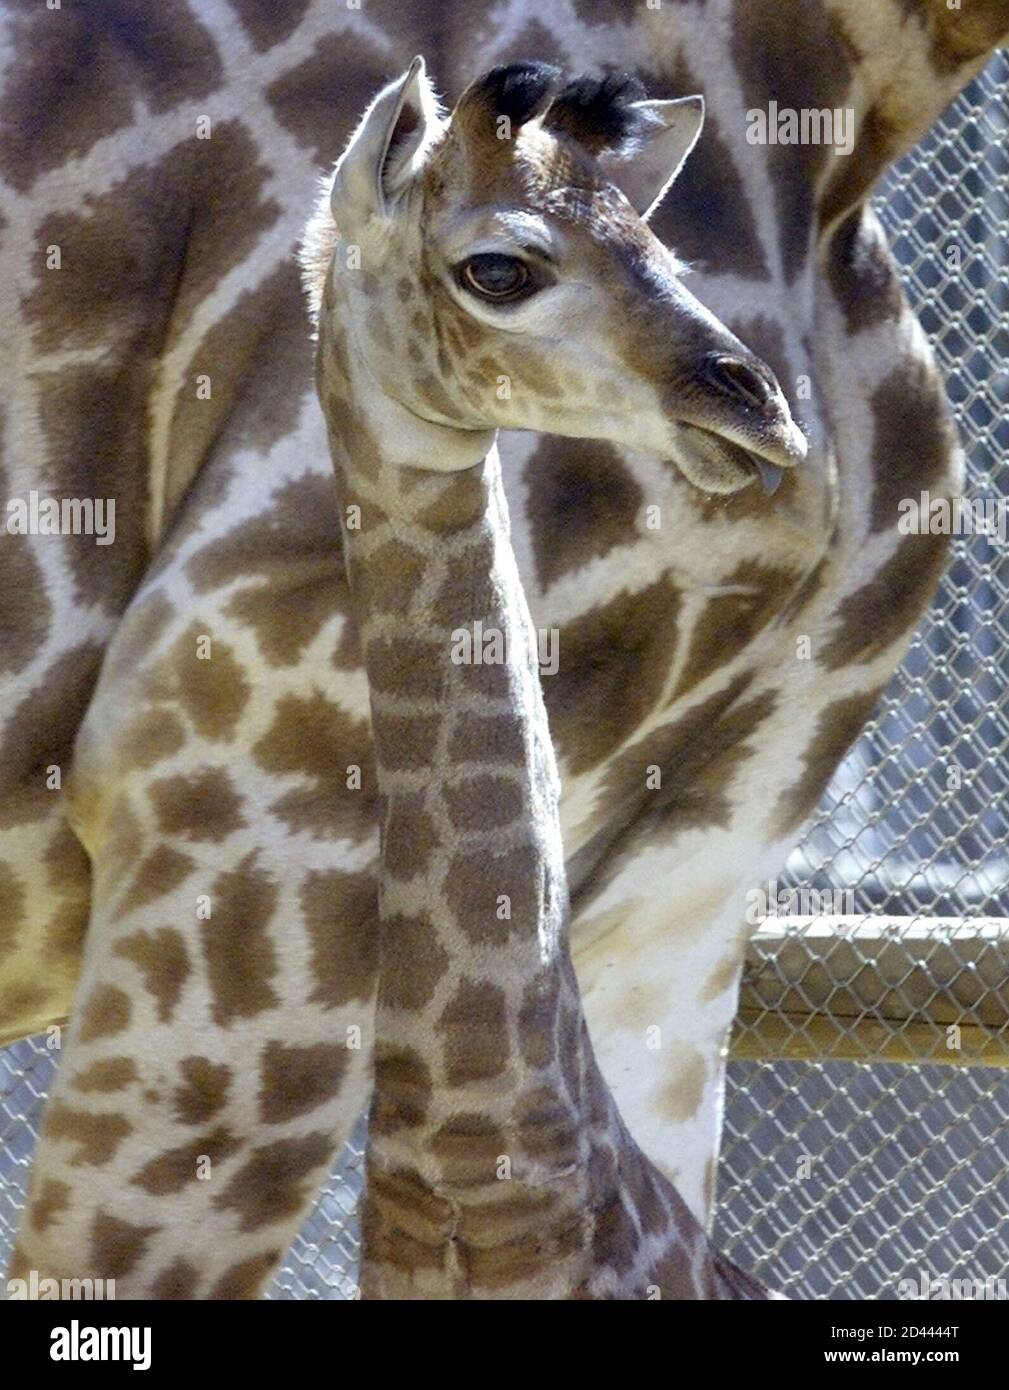 A male baby giraffe stands in front of his mother, Amber, at the Santiago  Zoo January 25, 2002. The giraffe (Girafa camelopardalis) was born in the  zoo on January 16, 2002, weighing